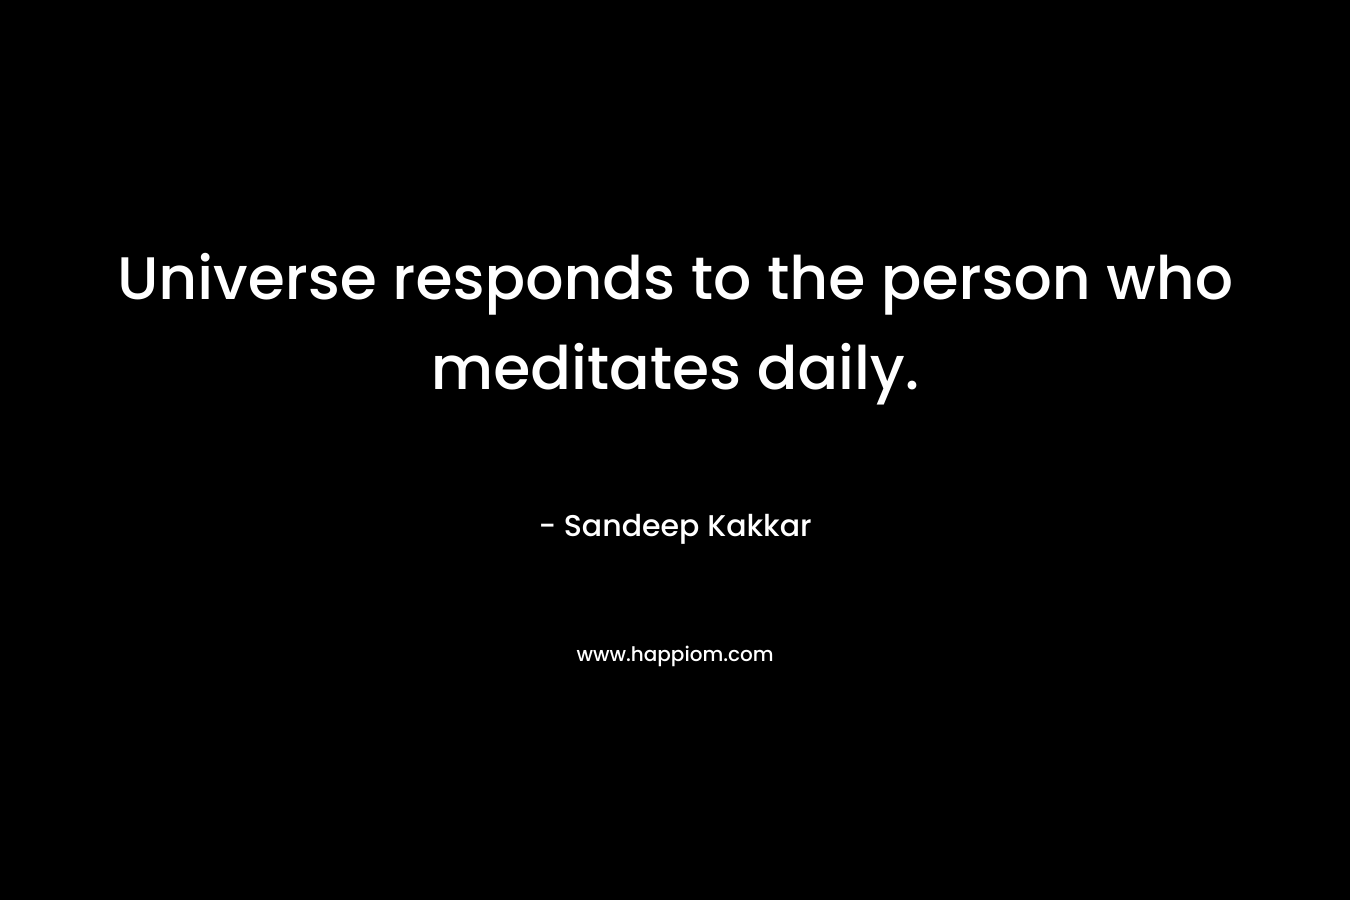 Universe responds to the person who meditates daily.